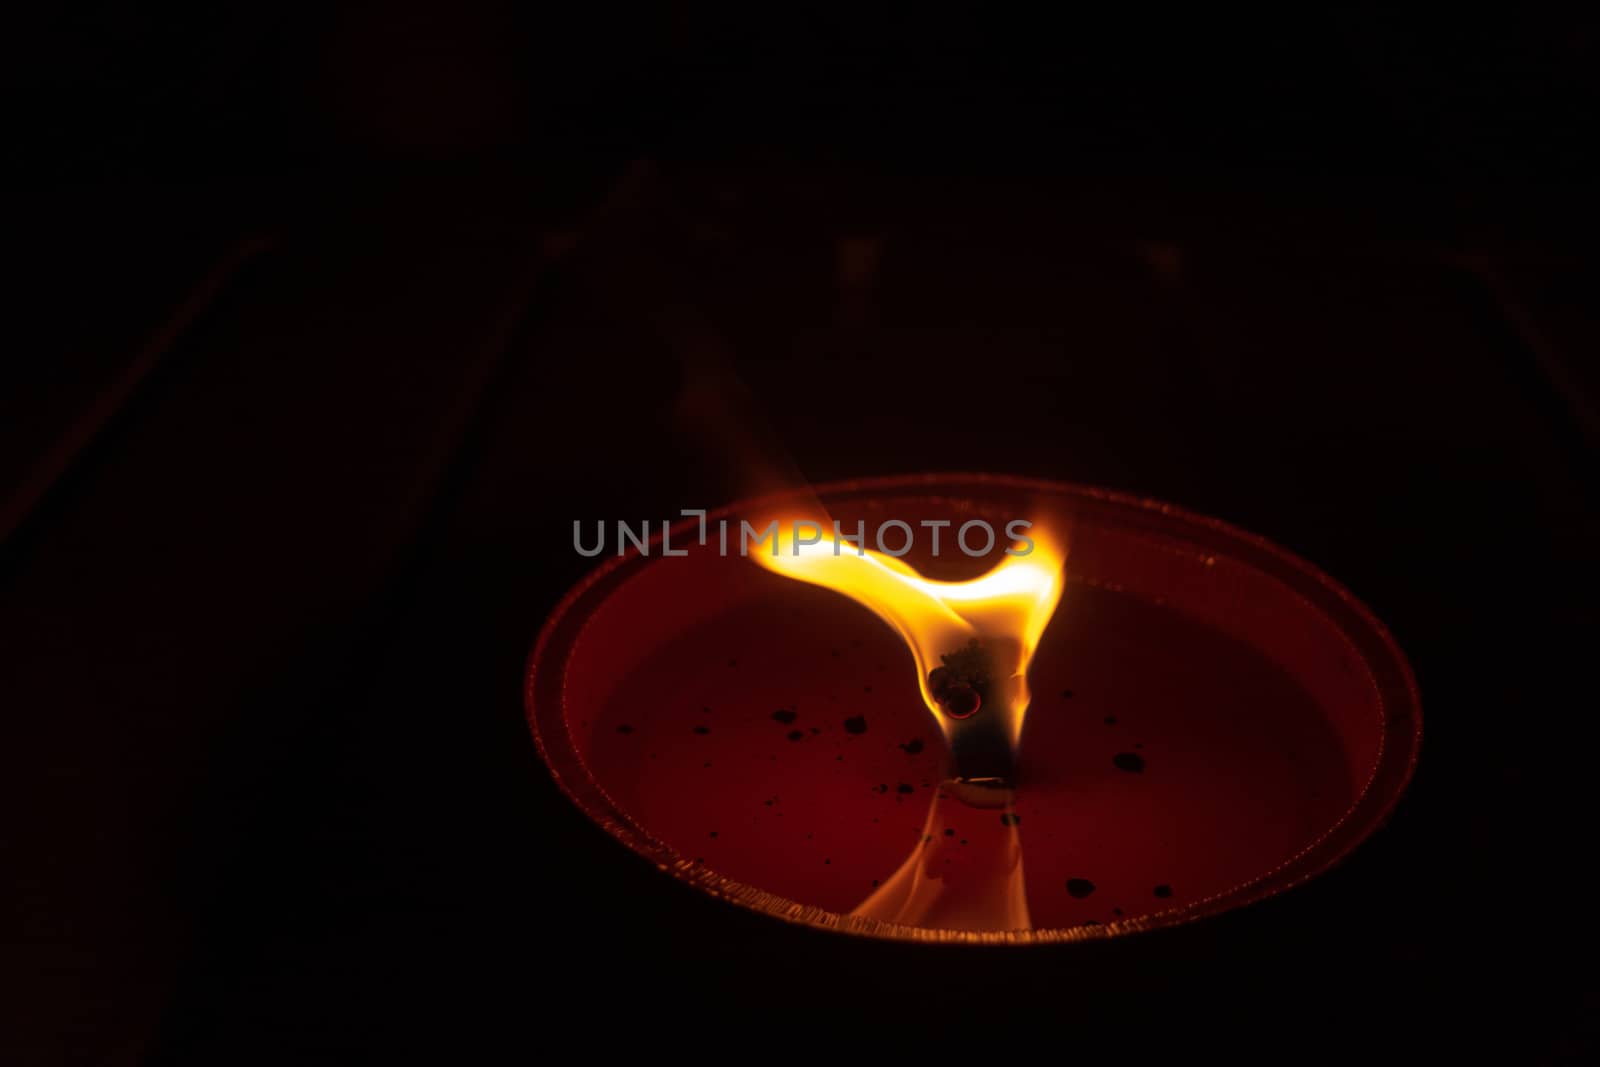 Candle flame close up on dark background, interesting flame figure by asafaric